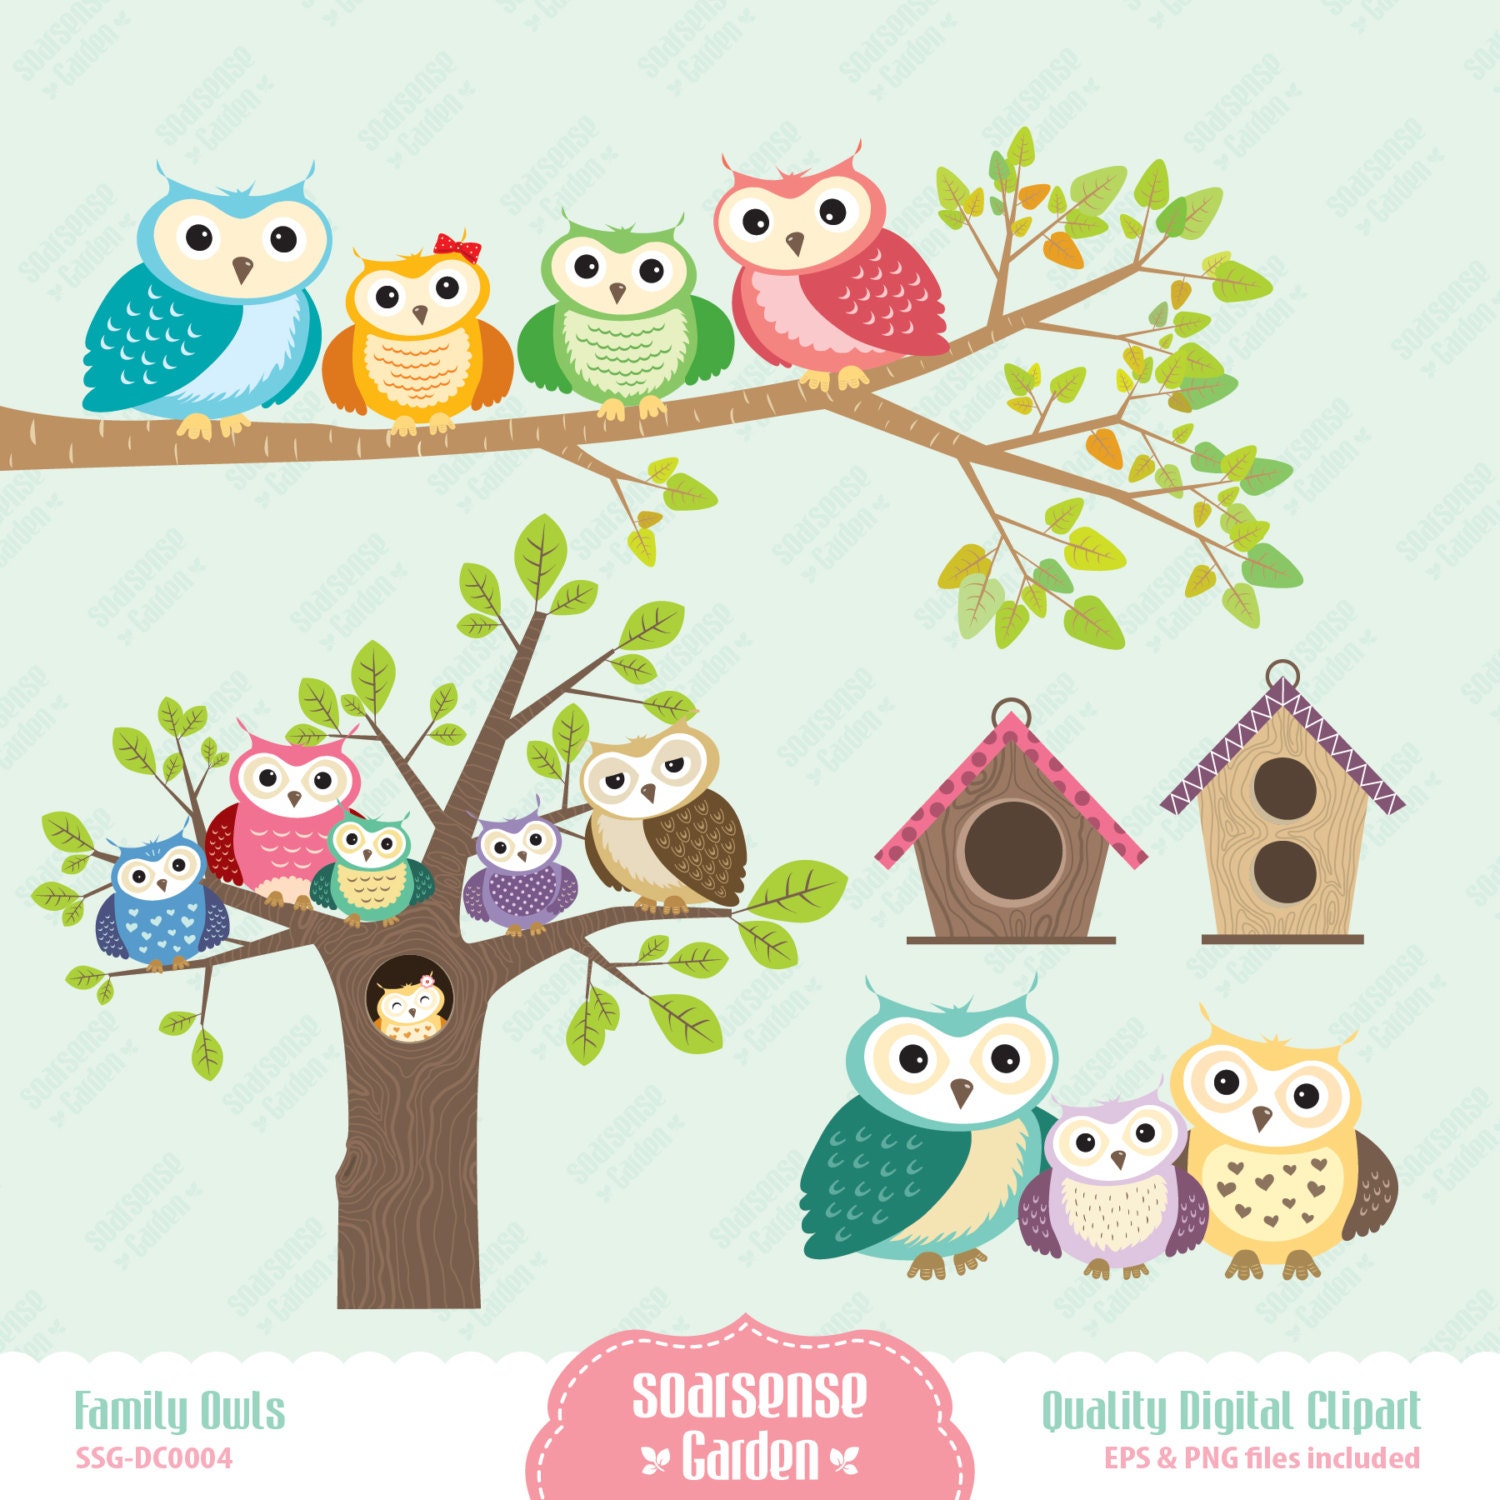 free vector owl clipart - photo #39